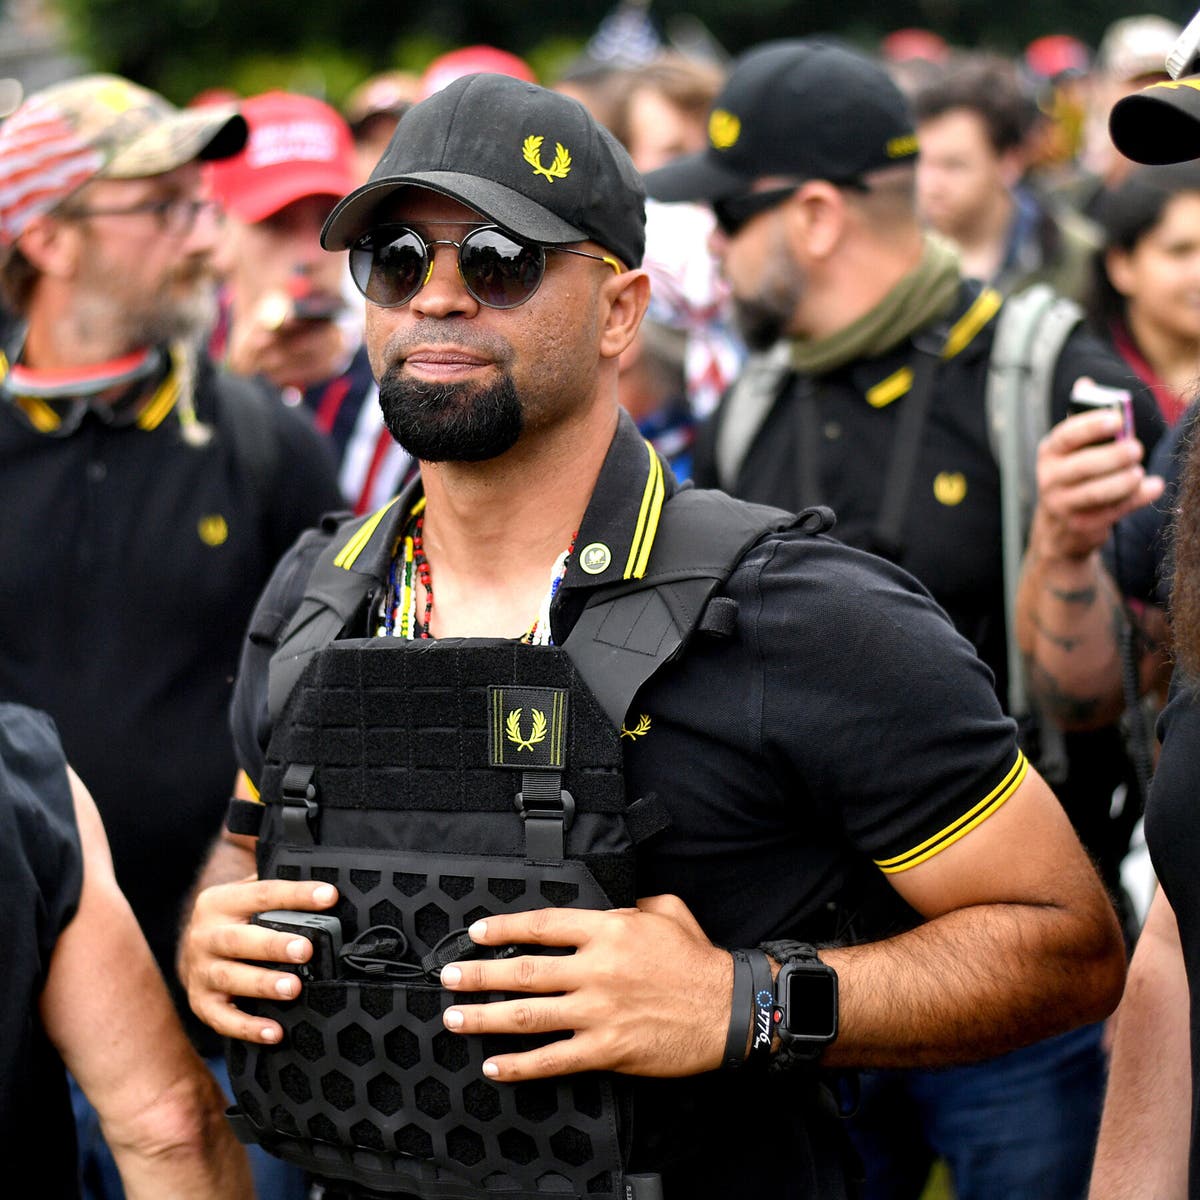 #EnriqueTarrio, the former leader of the Proud Boys, was sentenced on Tue to 22 yrs in prison for the central role he played in org a gang of his pro-Trump followers to attack the Capitol. Prosecutors portrayed the Proud Boys as having served as “Donald Trump’s army” on Jan 6…